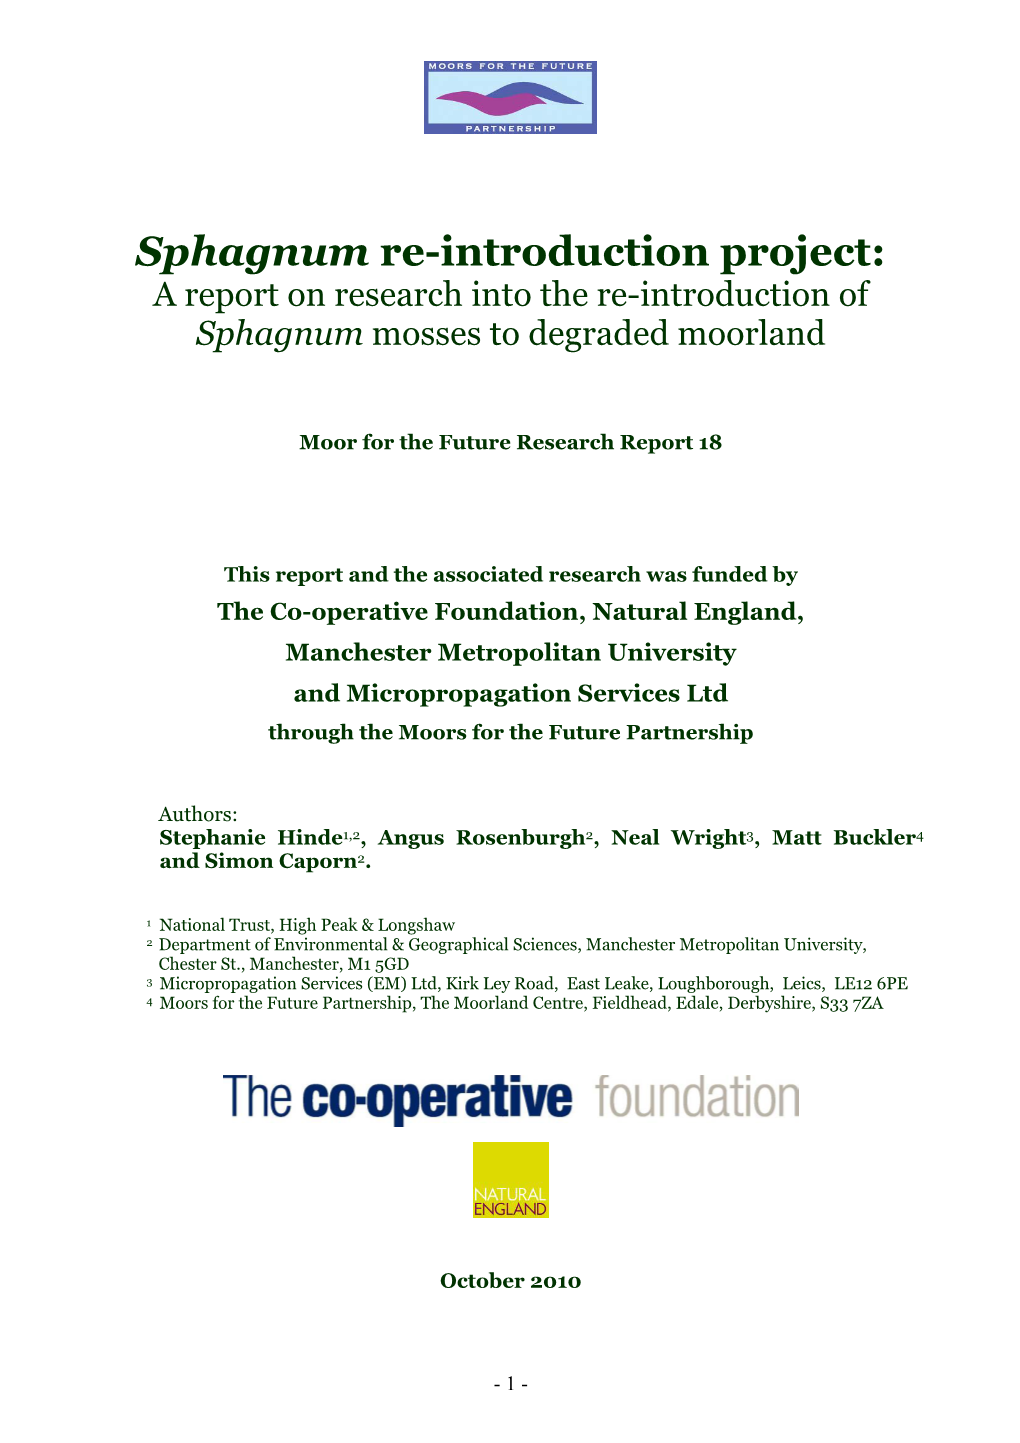 Sphagnum Re-Introduction Project: a Report on Research Into the Re-Introduction of Sphagnum Mosses to Degraded Moorland